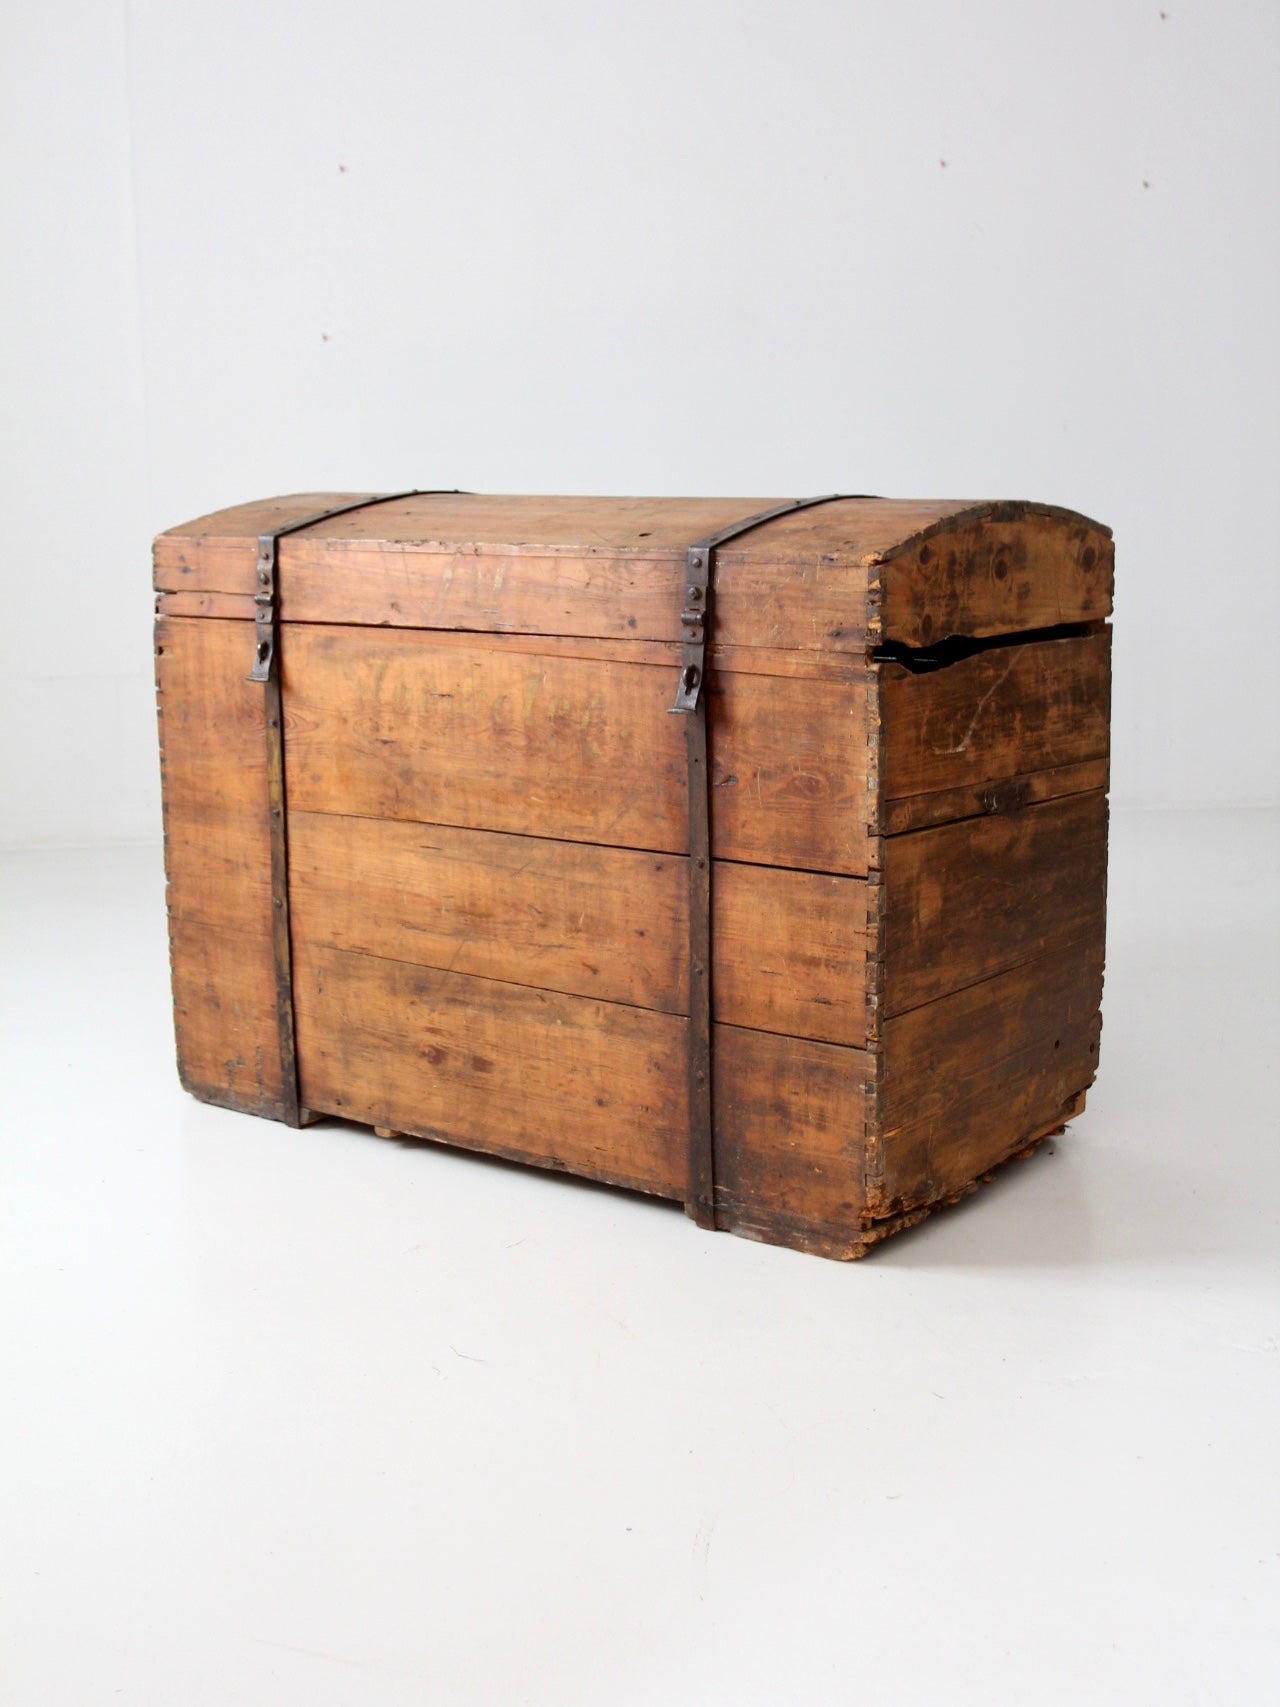 Simple Wooden Chest